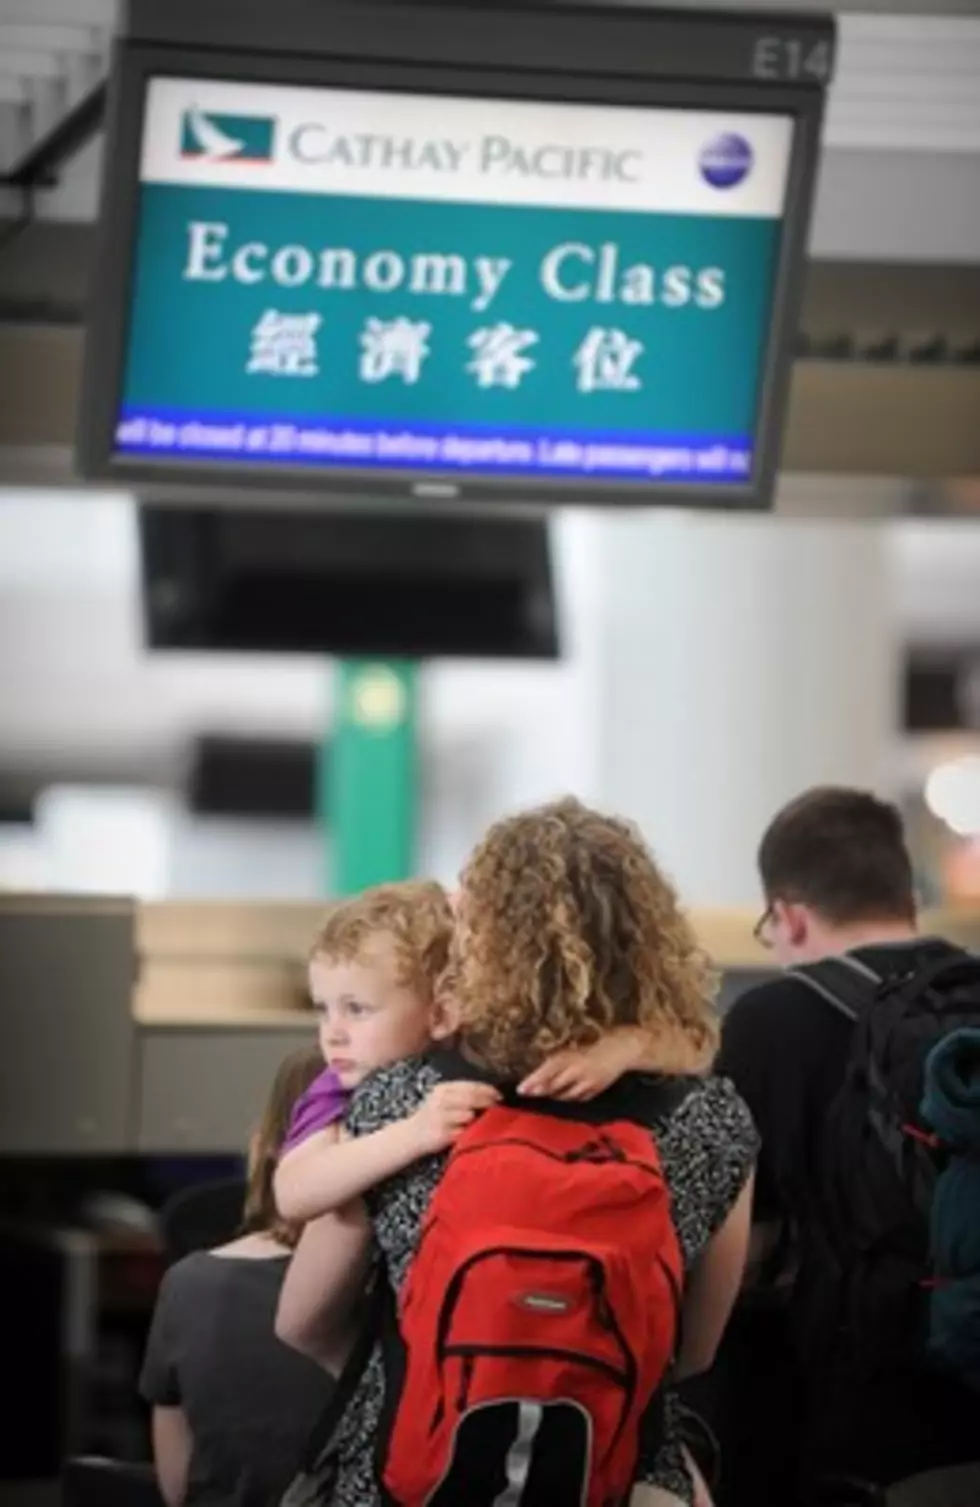 Flying With Small Children This Holiday Season? Here Are Some Tips